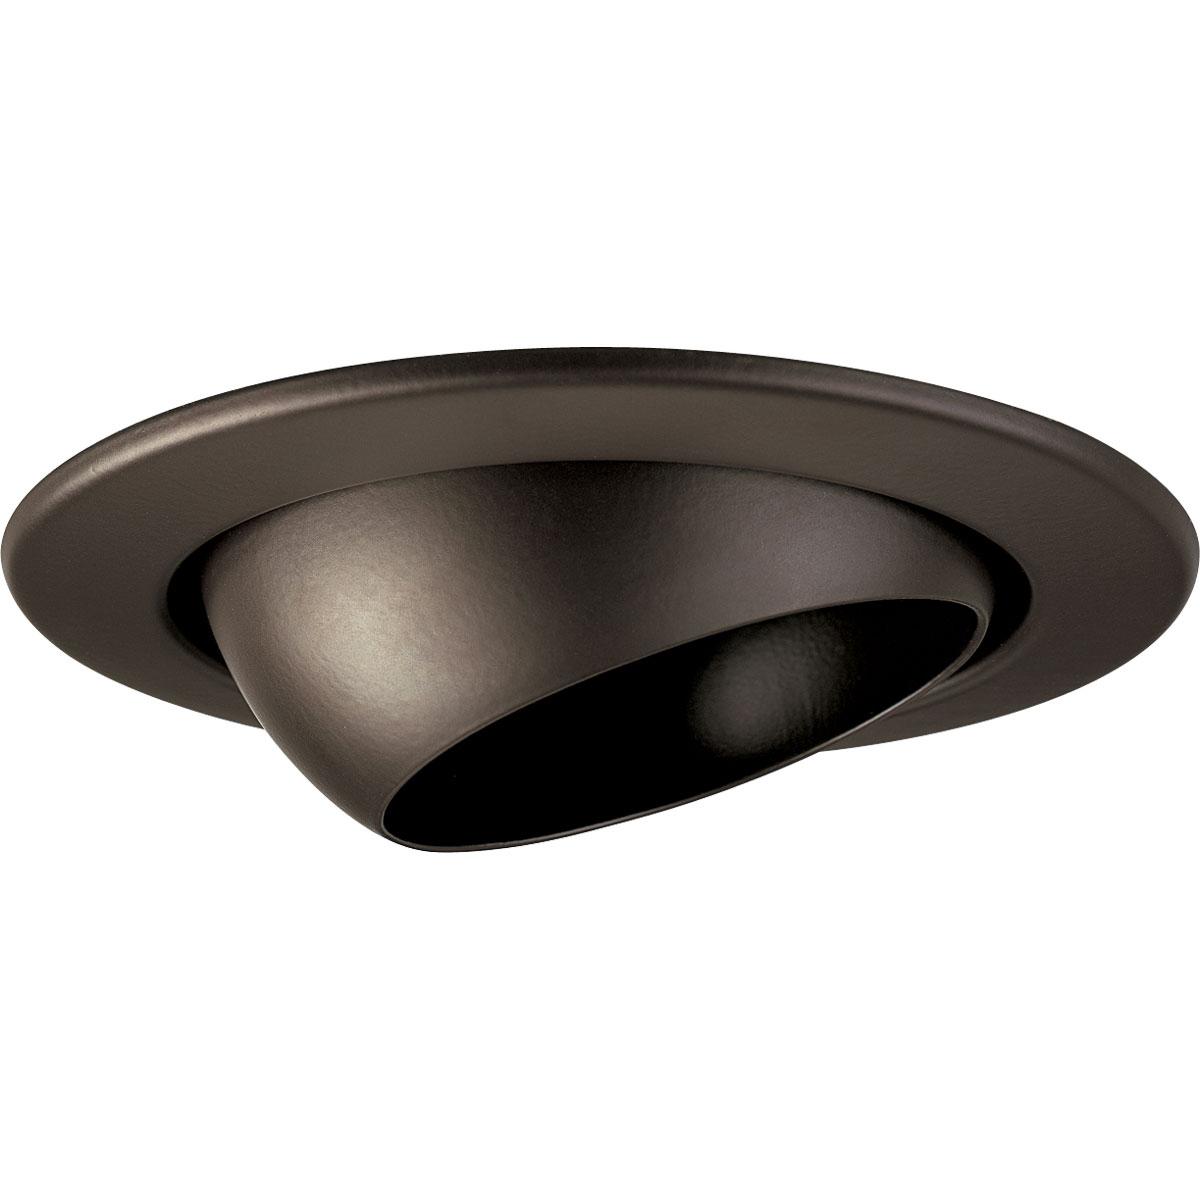 Hubbell P8046-20 4" Eyeball Trim in an Antique Bronze finish with unpainted flanges to match the baffle finish. 360 positioning, tilt 20. 5" outside diameter.  ; Antique Bronze finish. ; Matching flange. ; No light leaks around trim flange. ; One 40w PAR-16 or 30w R-20.